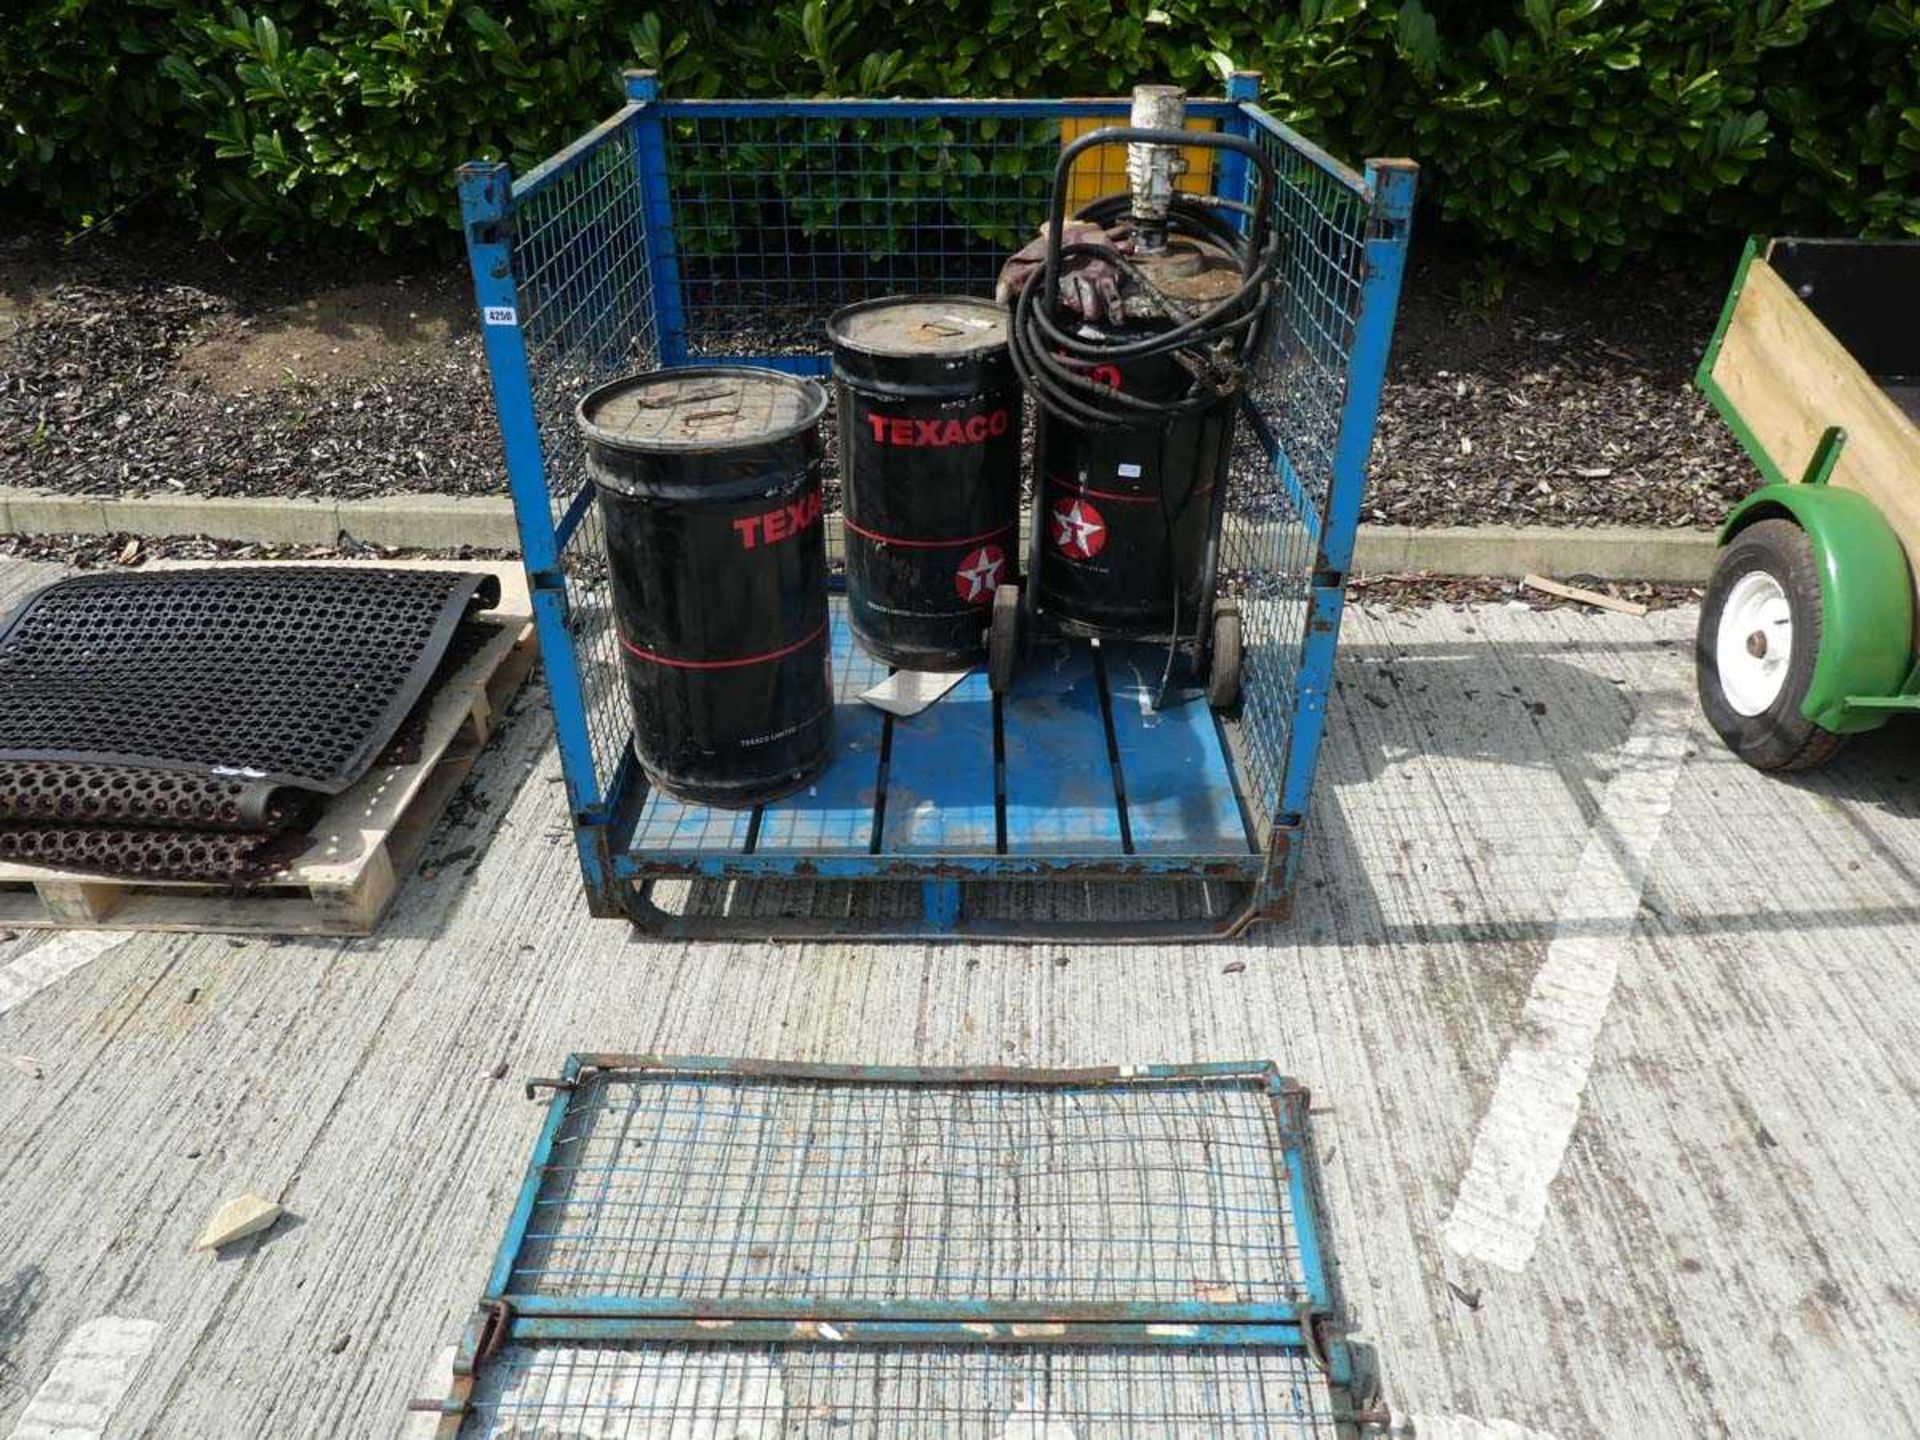 Large blue wire cage and grease dispenser, and 3 tubs of grease